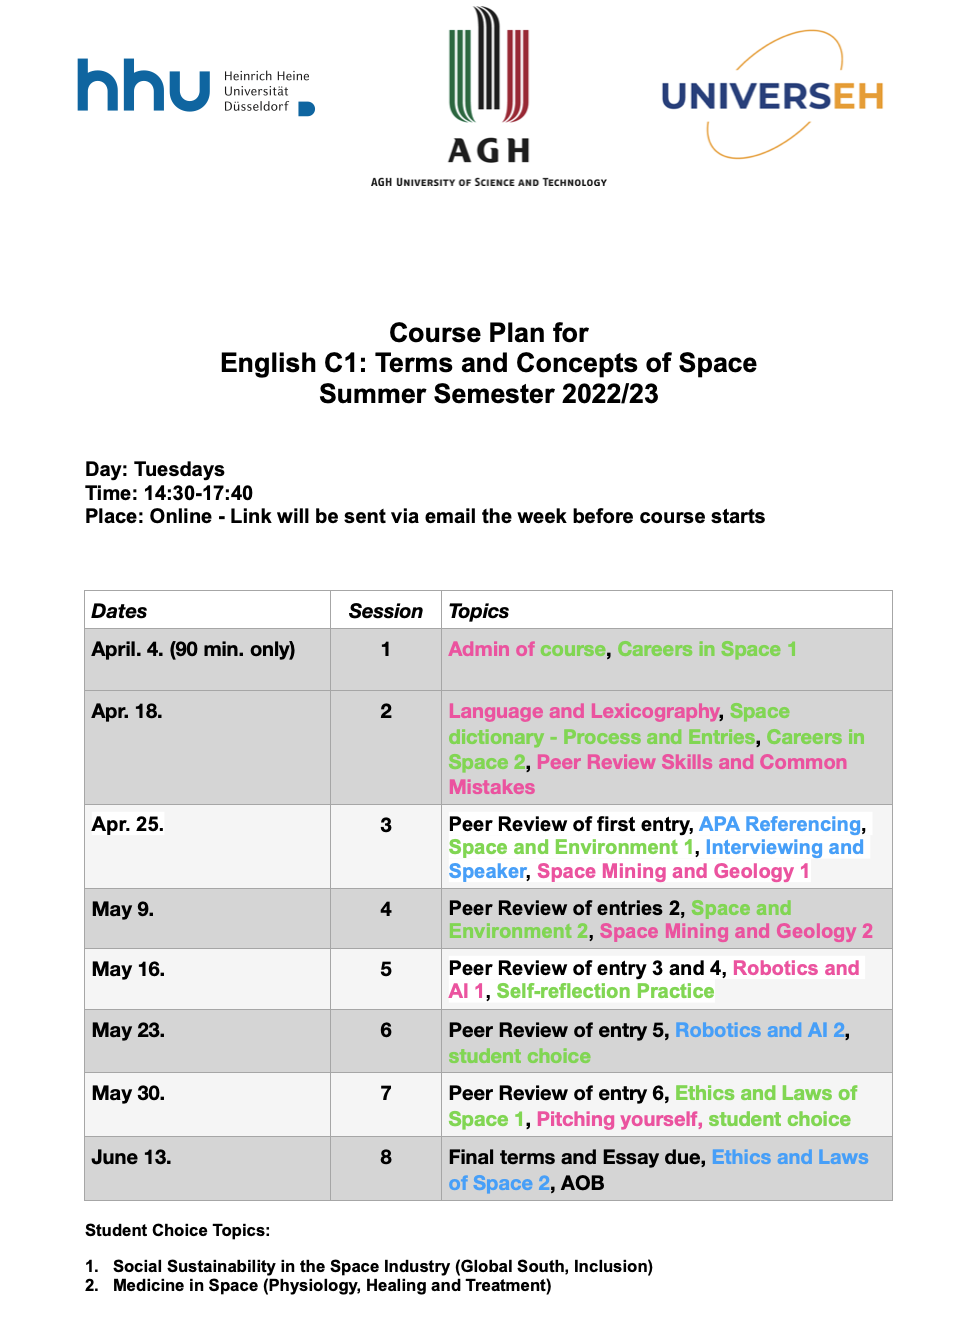 Course plan with dates and topics